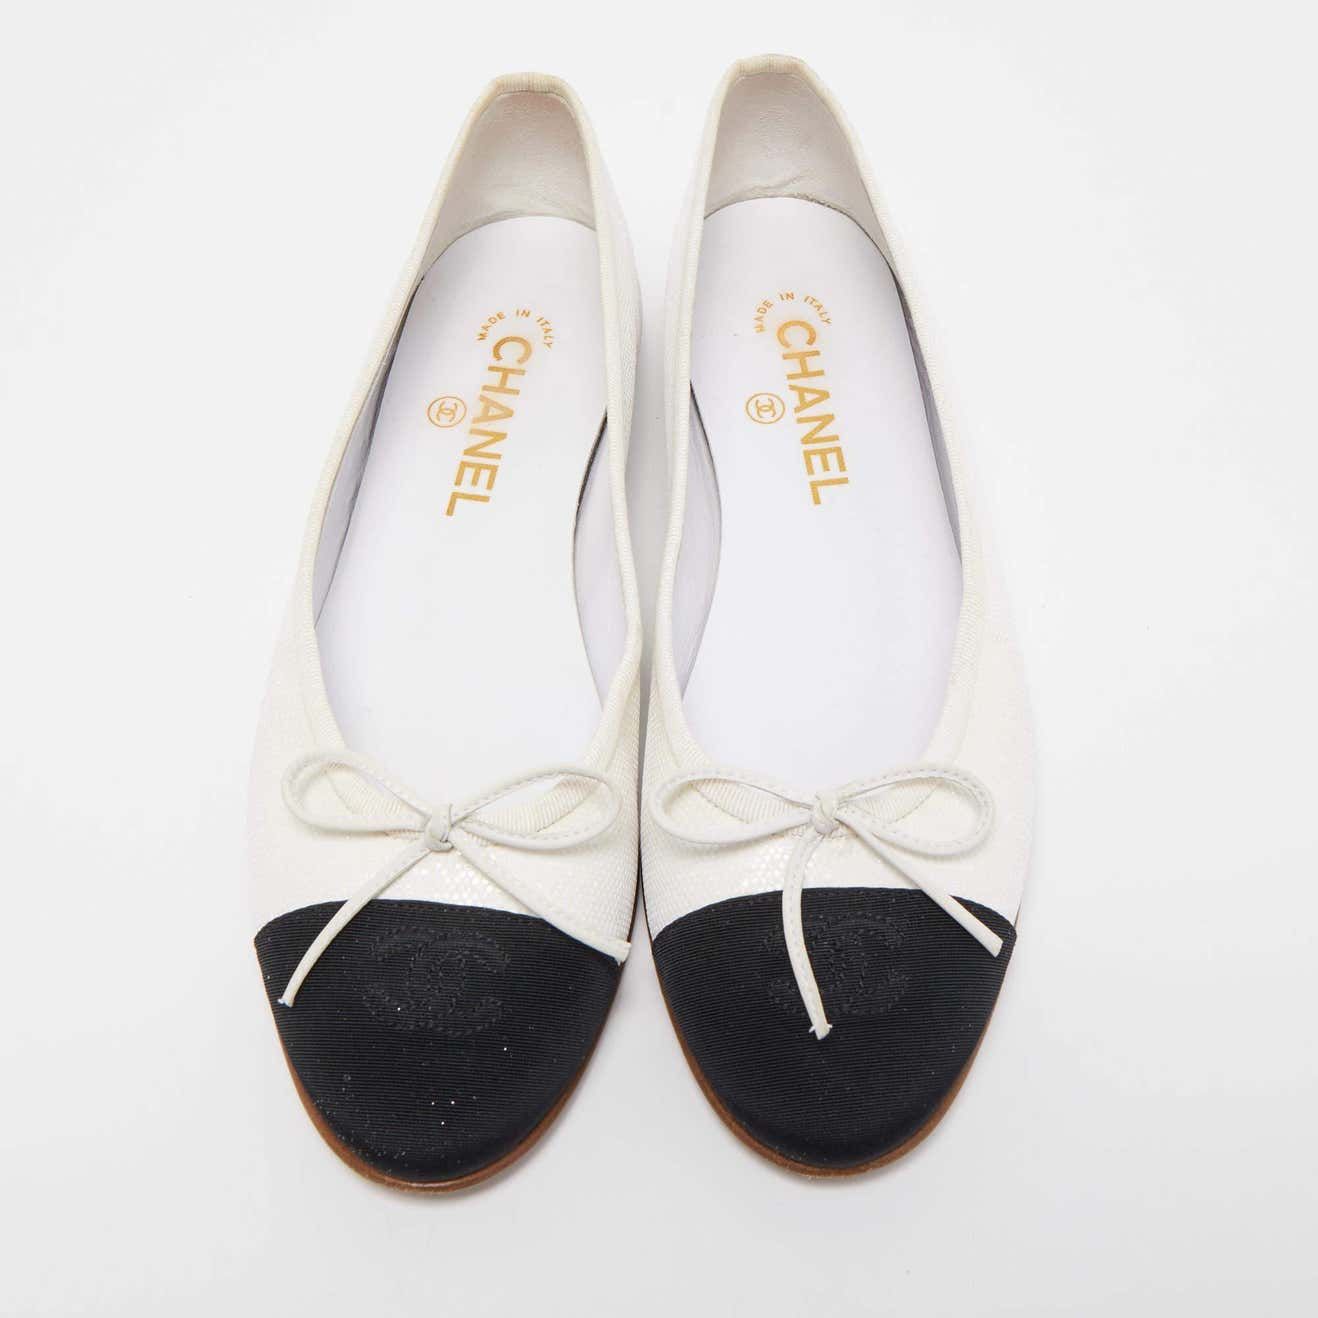 Where buy the Chanel ballet flat